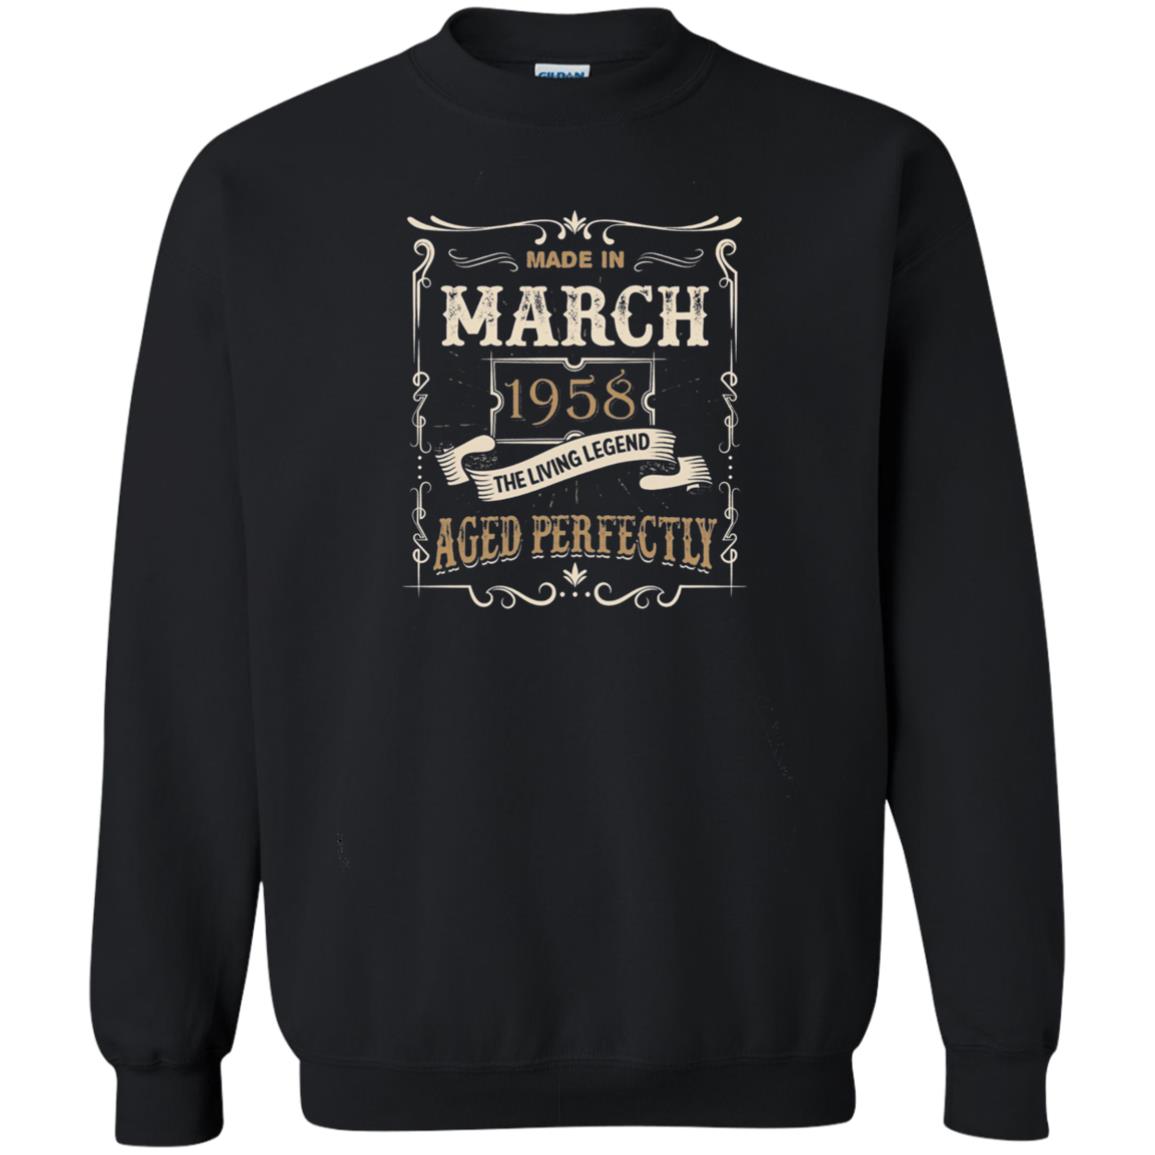 Made In March 1958 The Living Legend 60th Birthday T-shirt